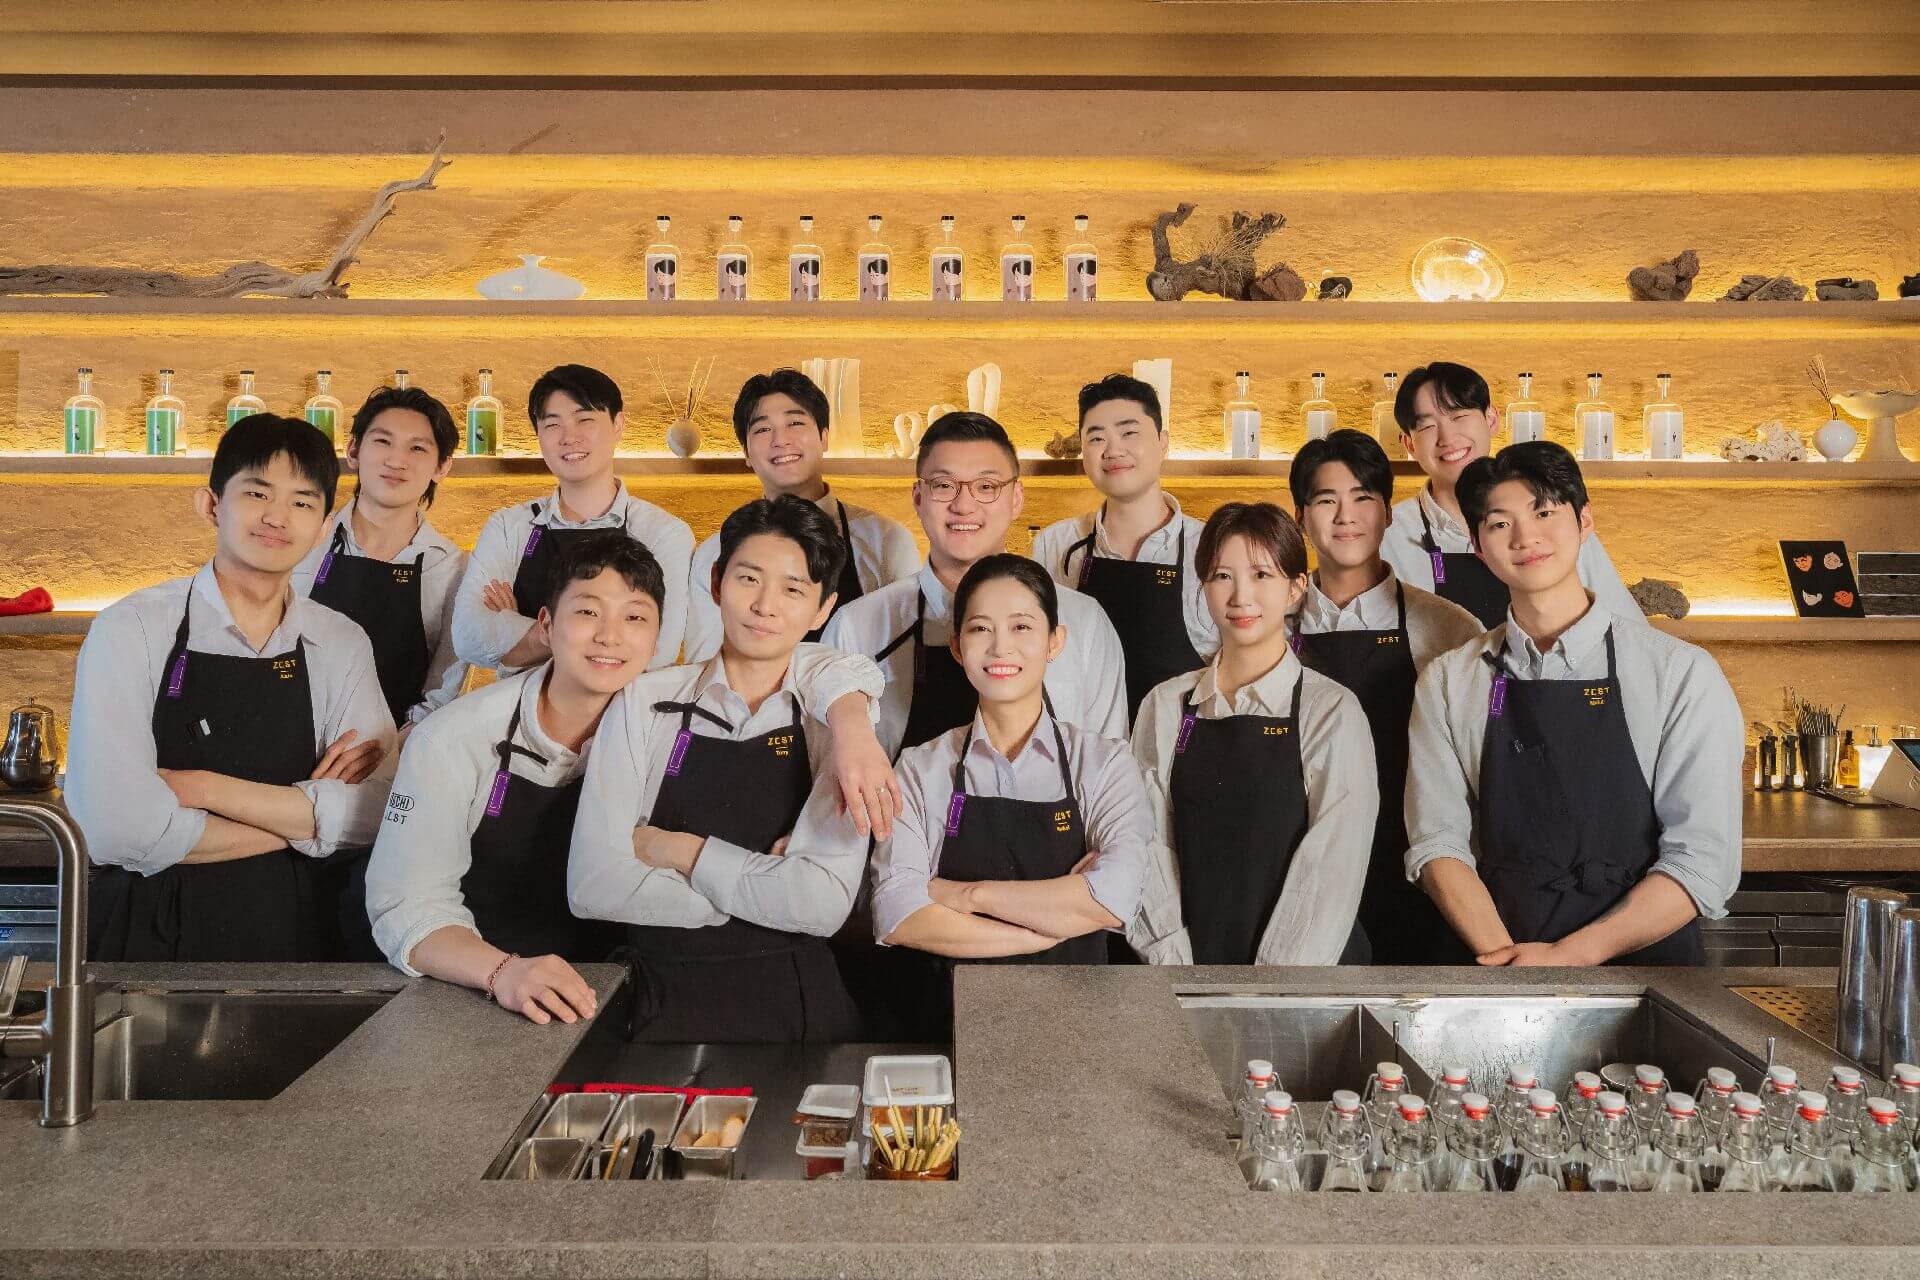 The Zest bar team, led by Dohyung "Demie" Kim, in Seoul, South Korea